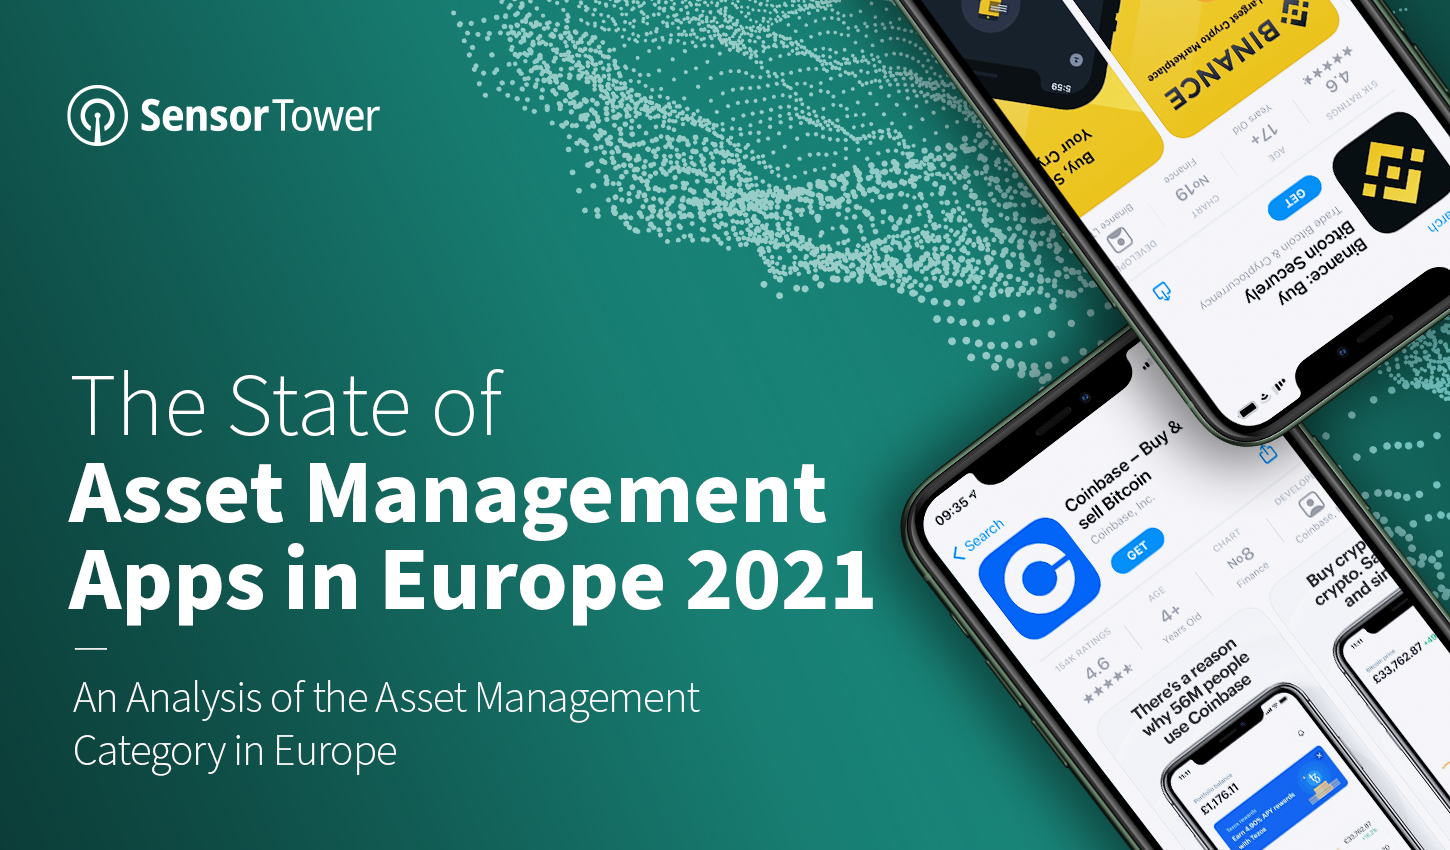 Takeaways from Sensor Tower's State of Asset Management Apps in Europe 2021 Report